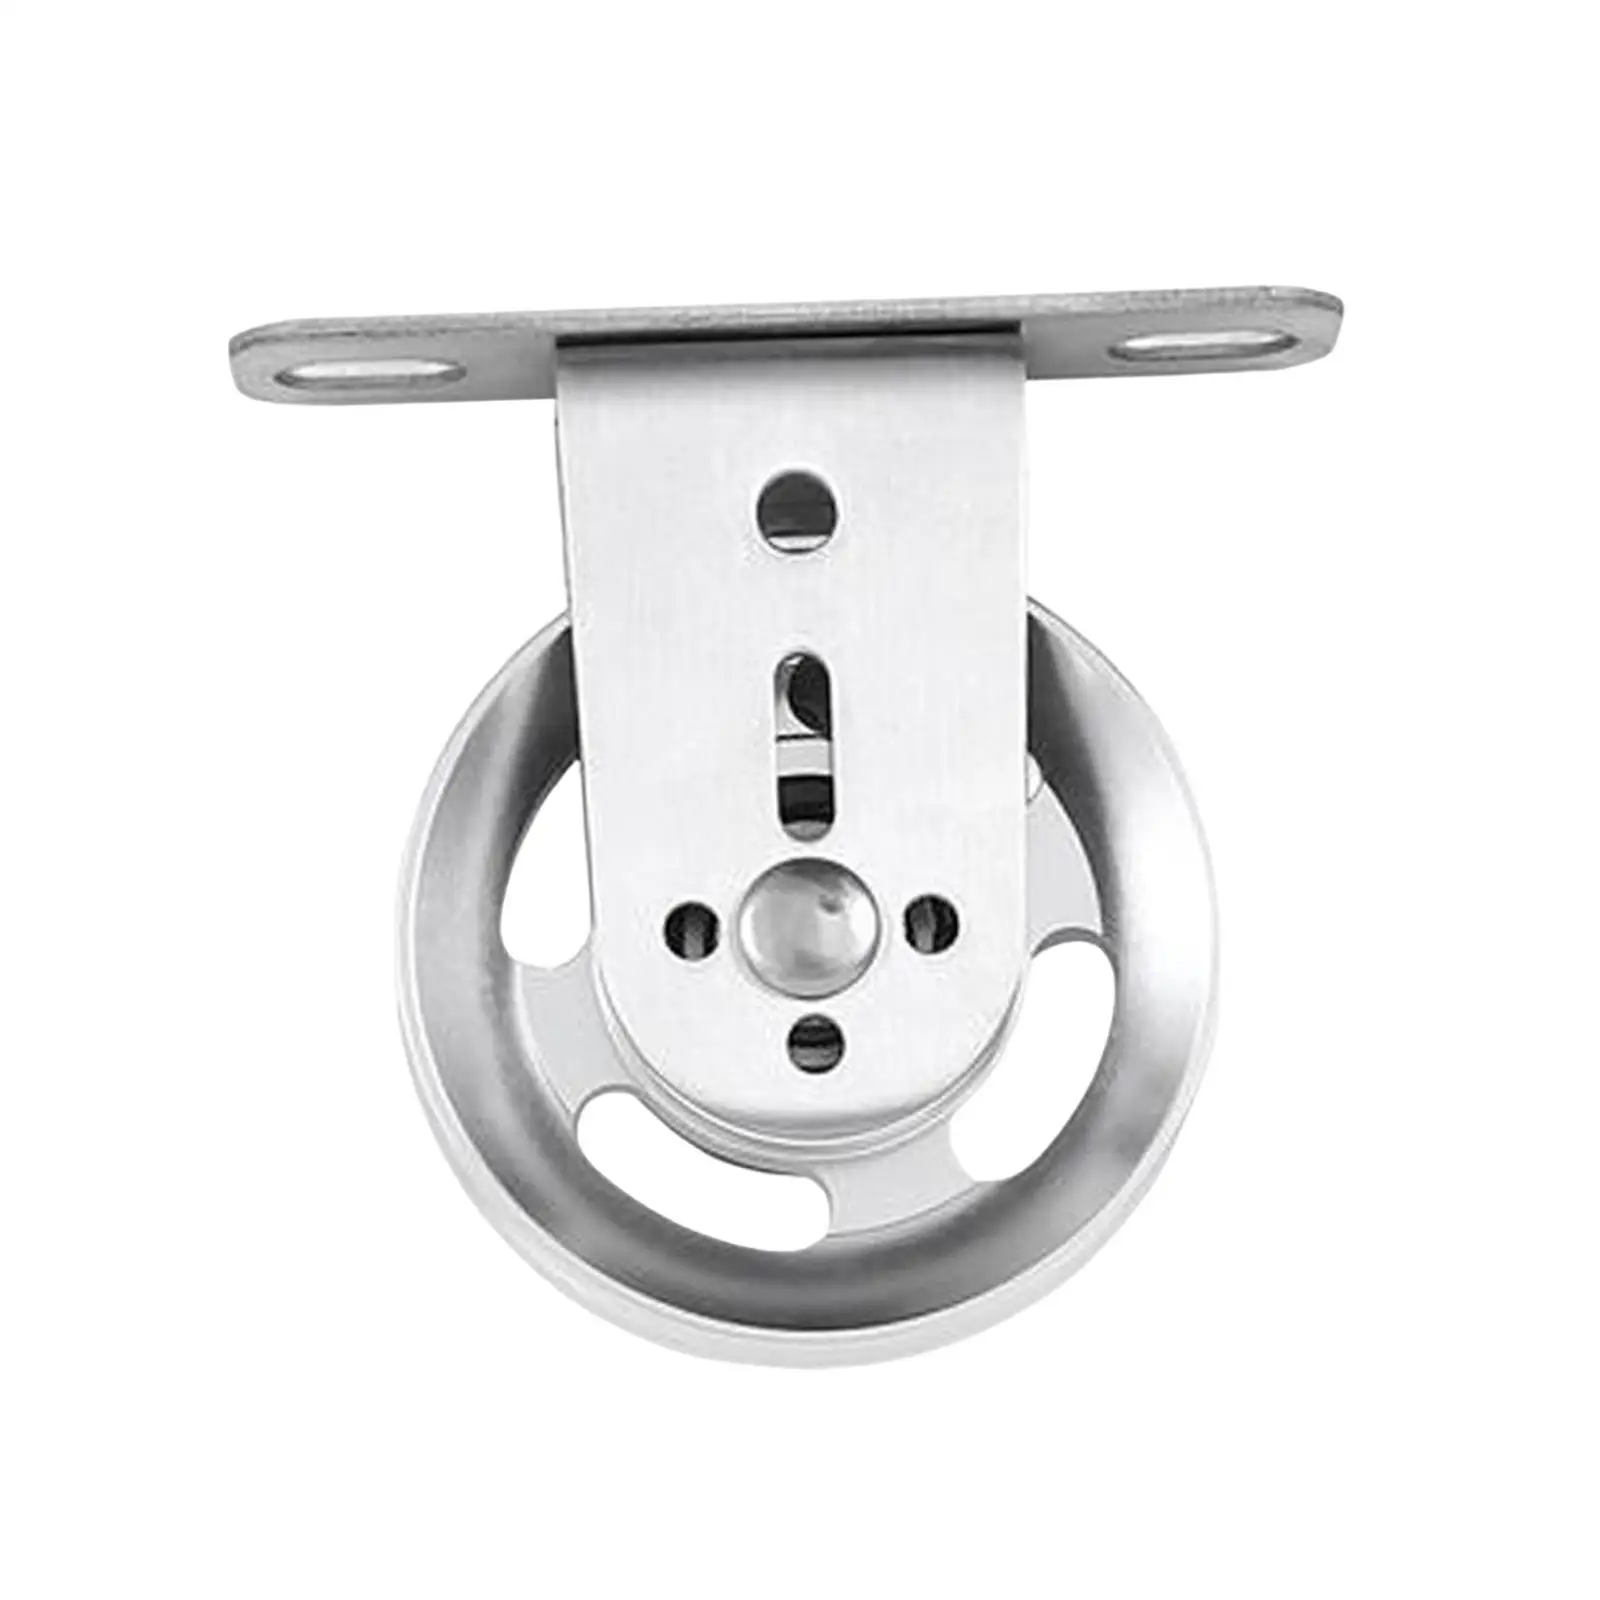 Bearing Pulley Wheel Low Noise Lifting Pulley for Ladder Lifts Home Fitness